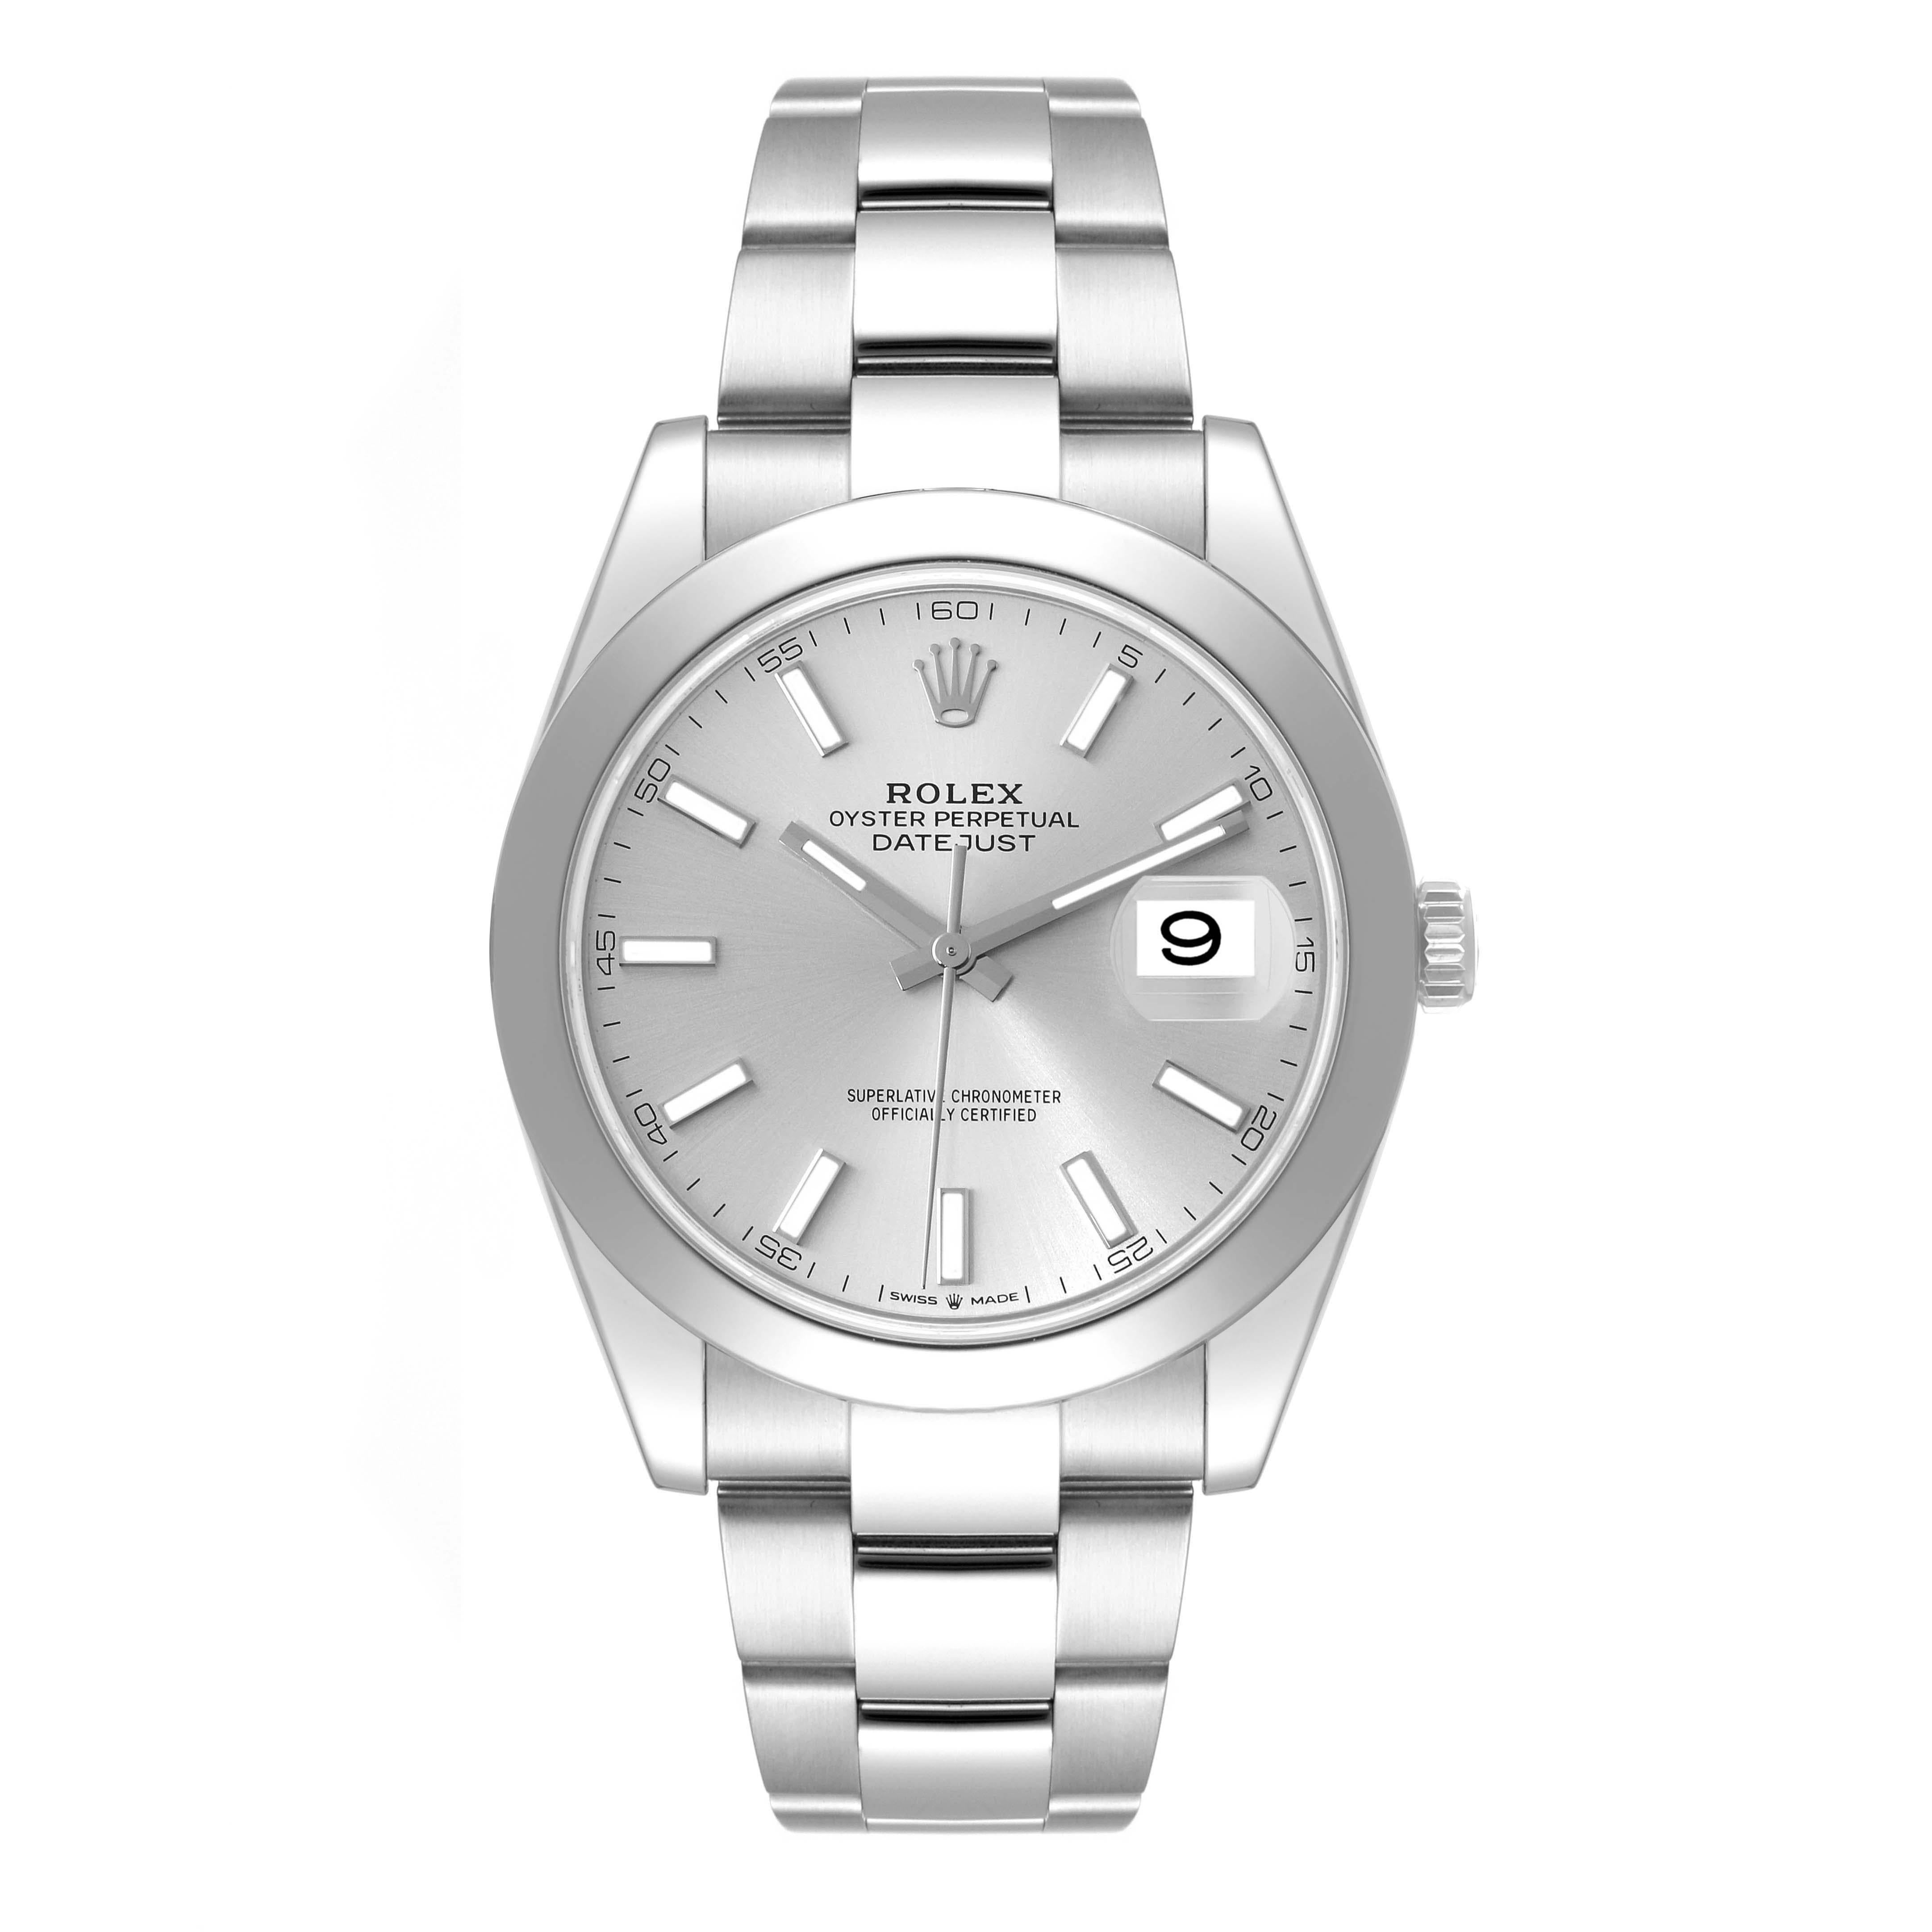 Rolex Datejust 41 Silver Dial Steel Mens Watch 126300 Box Card. Officially certified chronometer automatic self-winding movement. Stainless steel case 41 mm in diameter. Rolex logo on a crown. Stainless steel smooth domed bezel. Scratch resistant